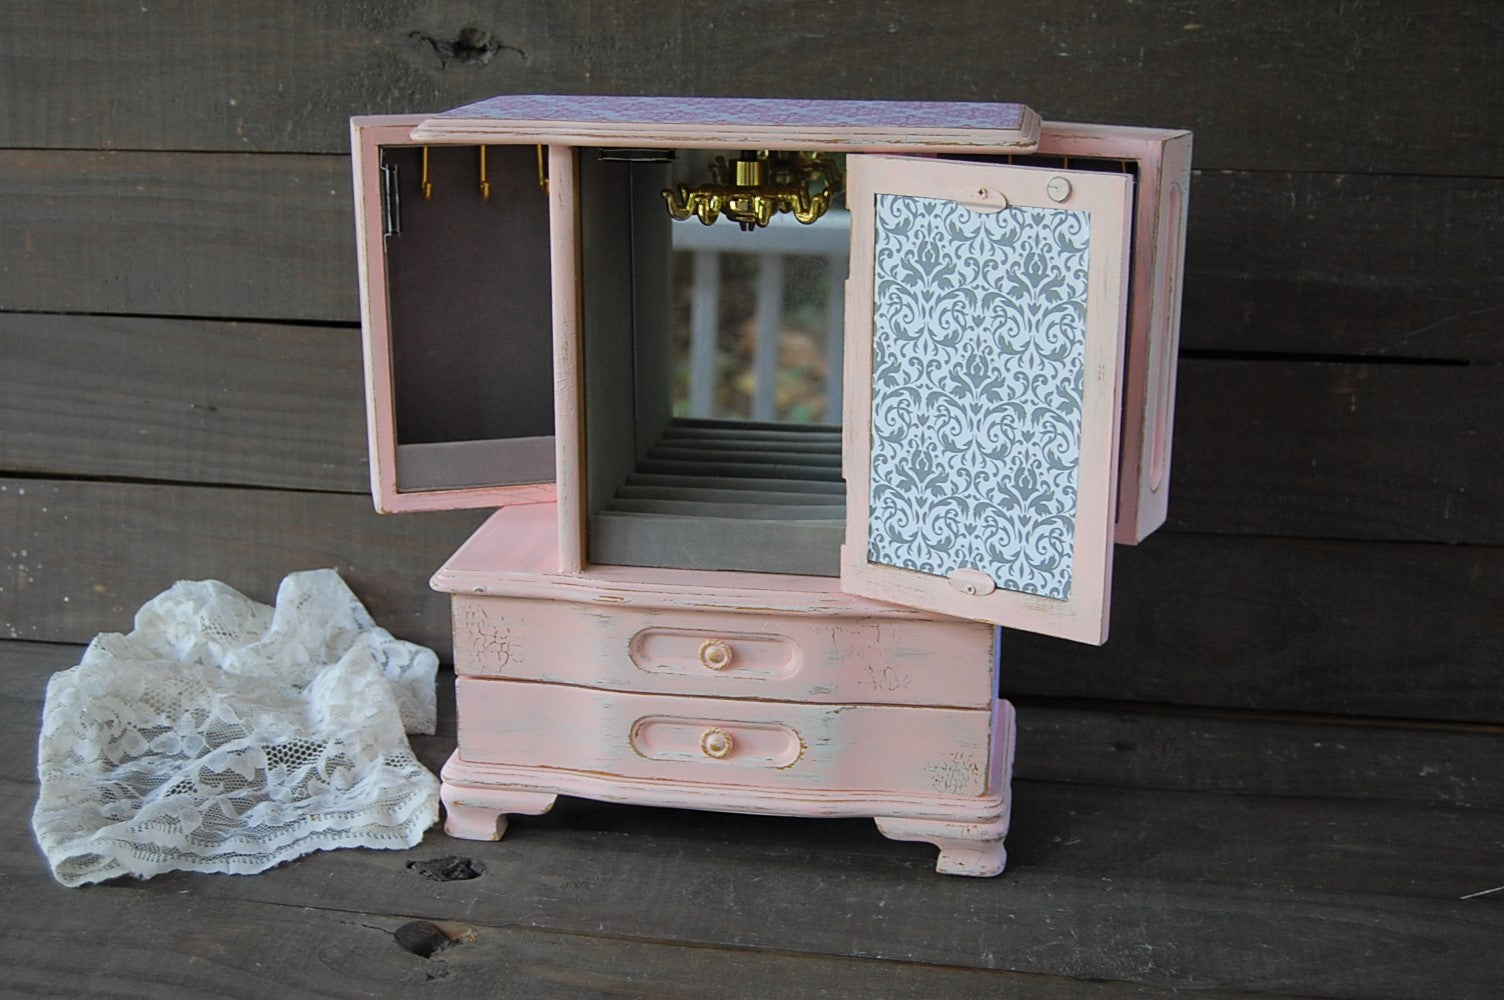 Pink & grey damask armoire - The Vintage Artistry